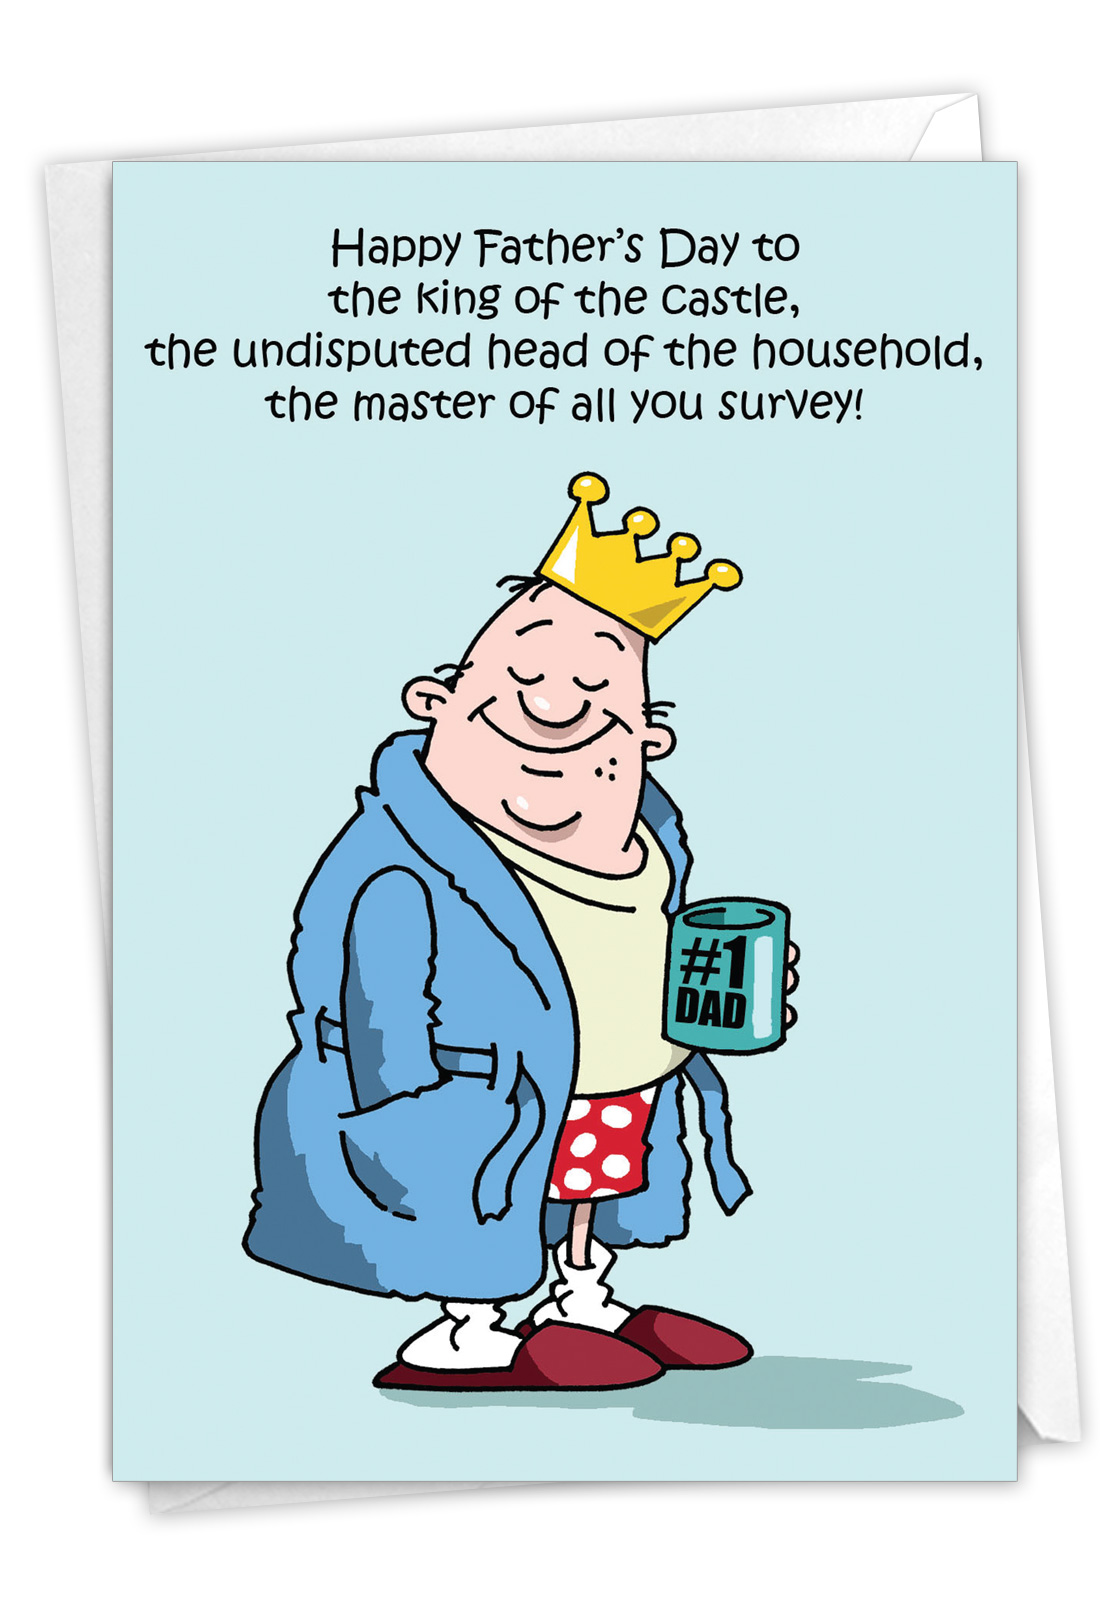 j0239-jumbo-funny-fathers-day-card-king-of-the-castle-with-matching